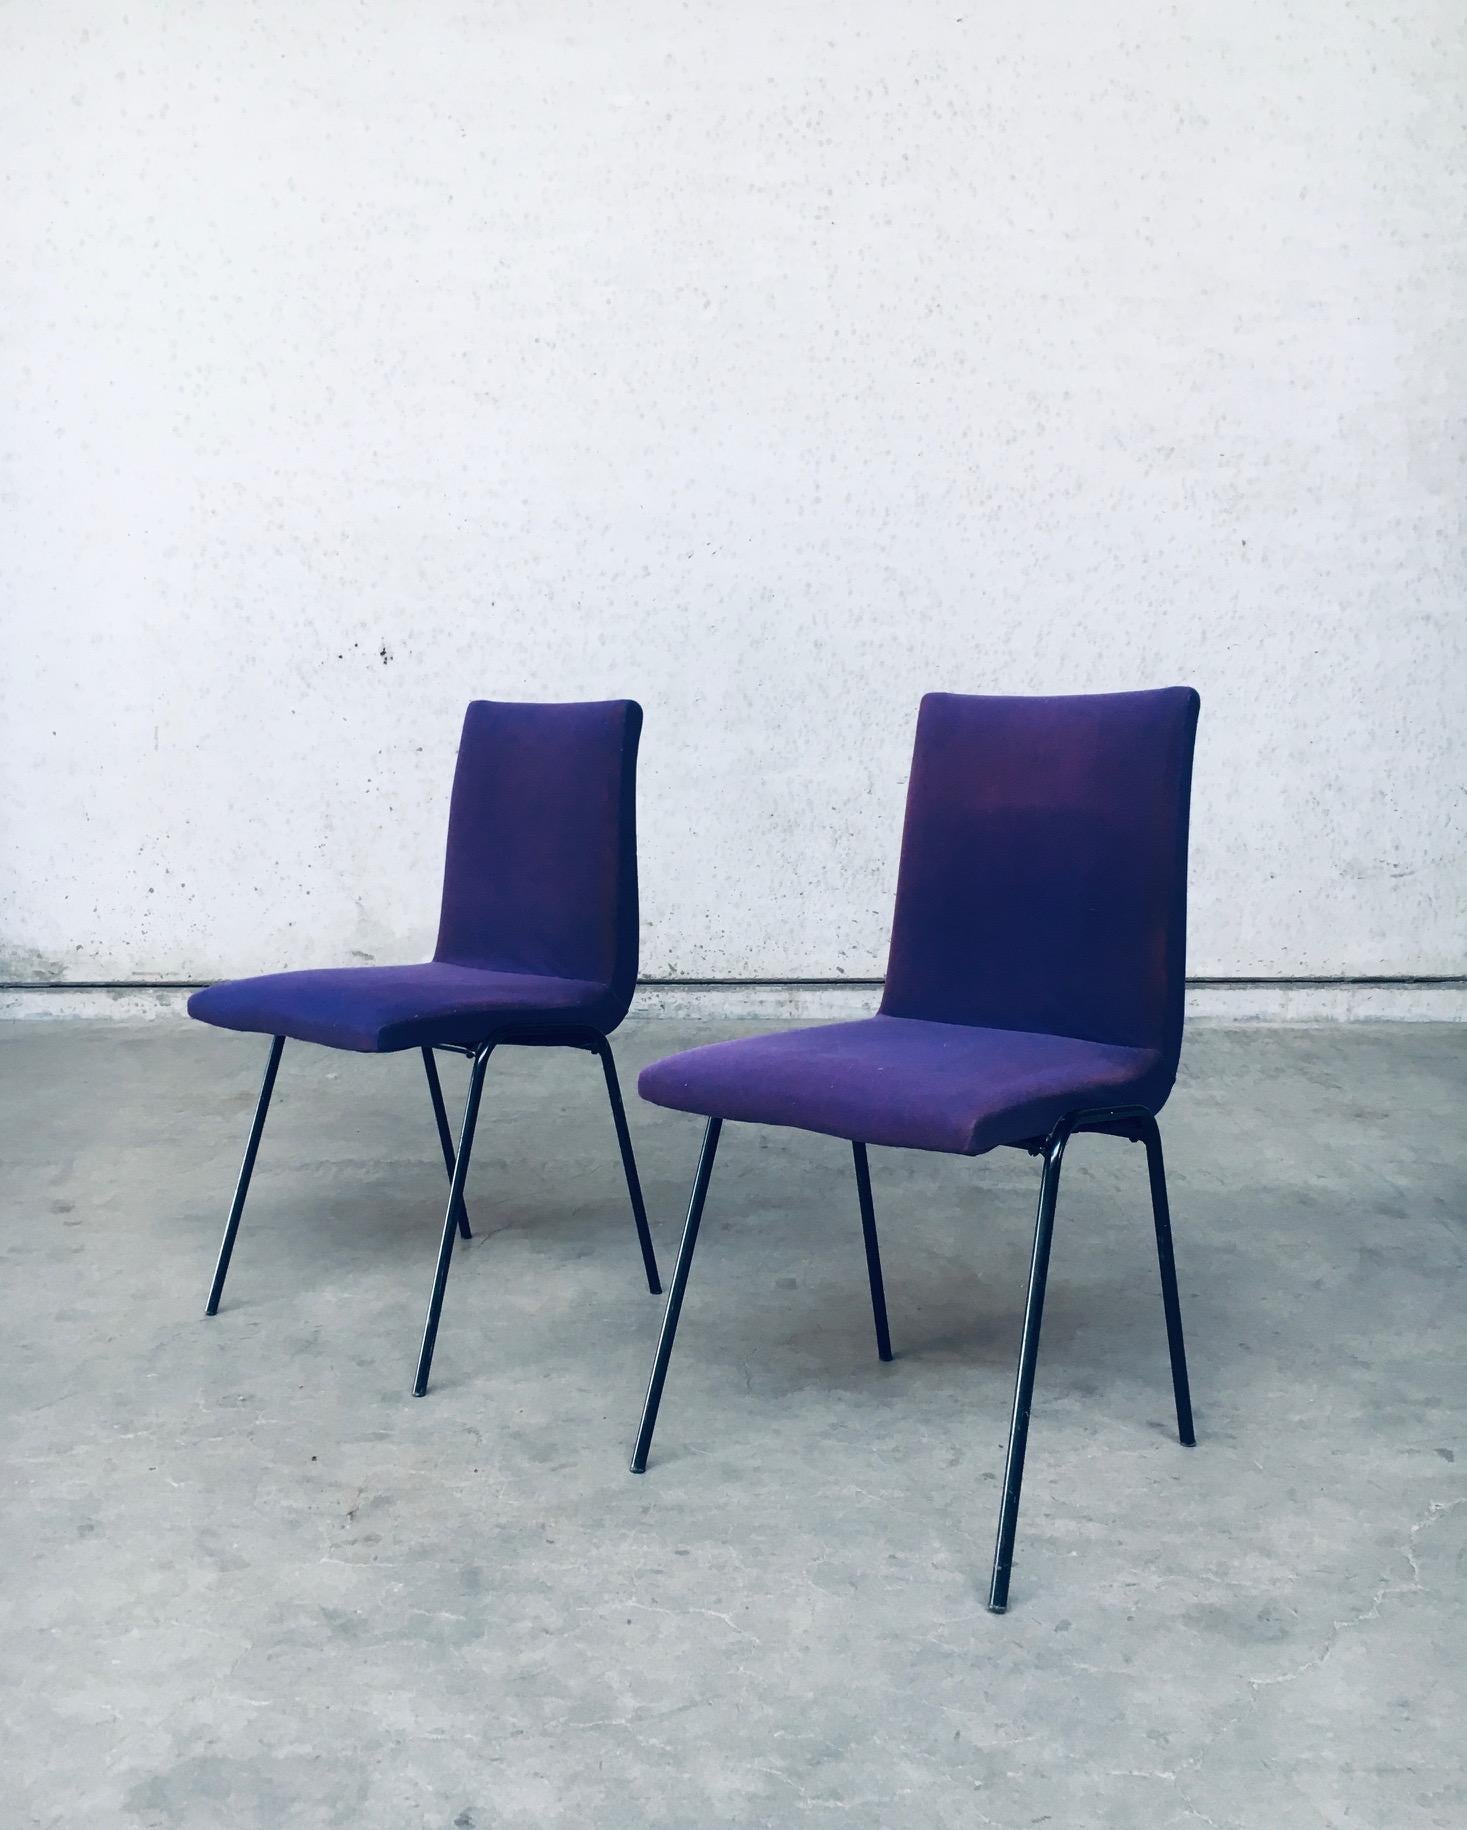 Vintage Mid-Century Modern design Robin dining chair set of 2 by Pierre Guariche for Meurop, made in Belgium late 1950's. All original purple fabric on seat on black metal frame base with original small stoppers at the feet. Both chairs are in very